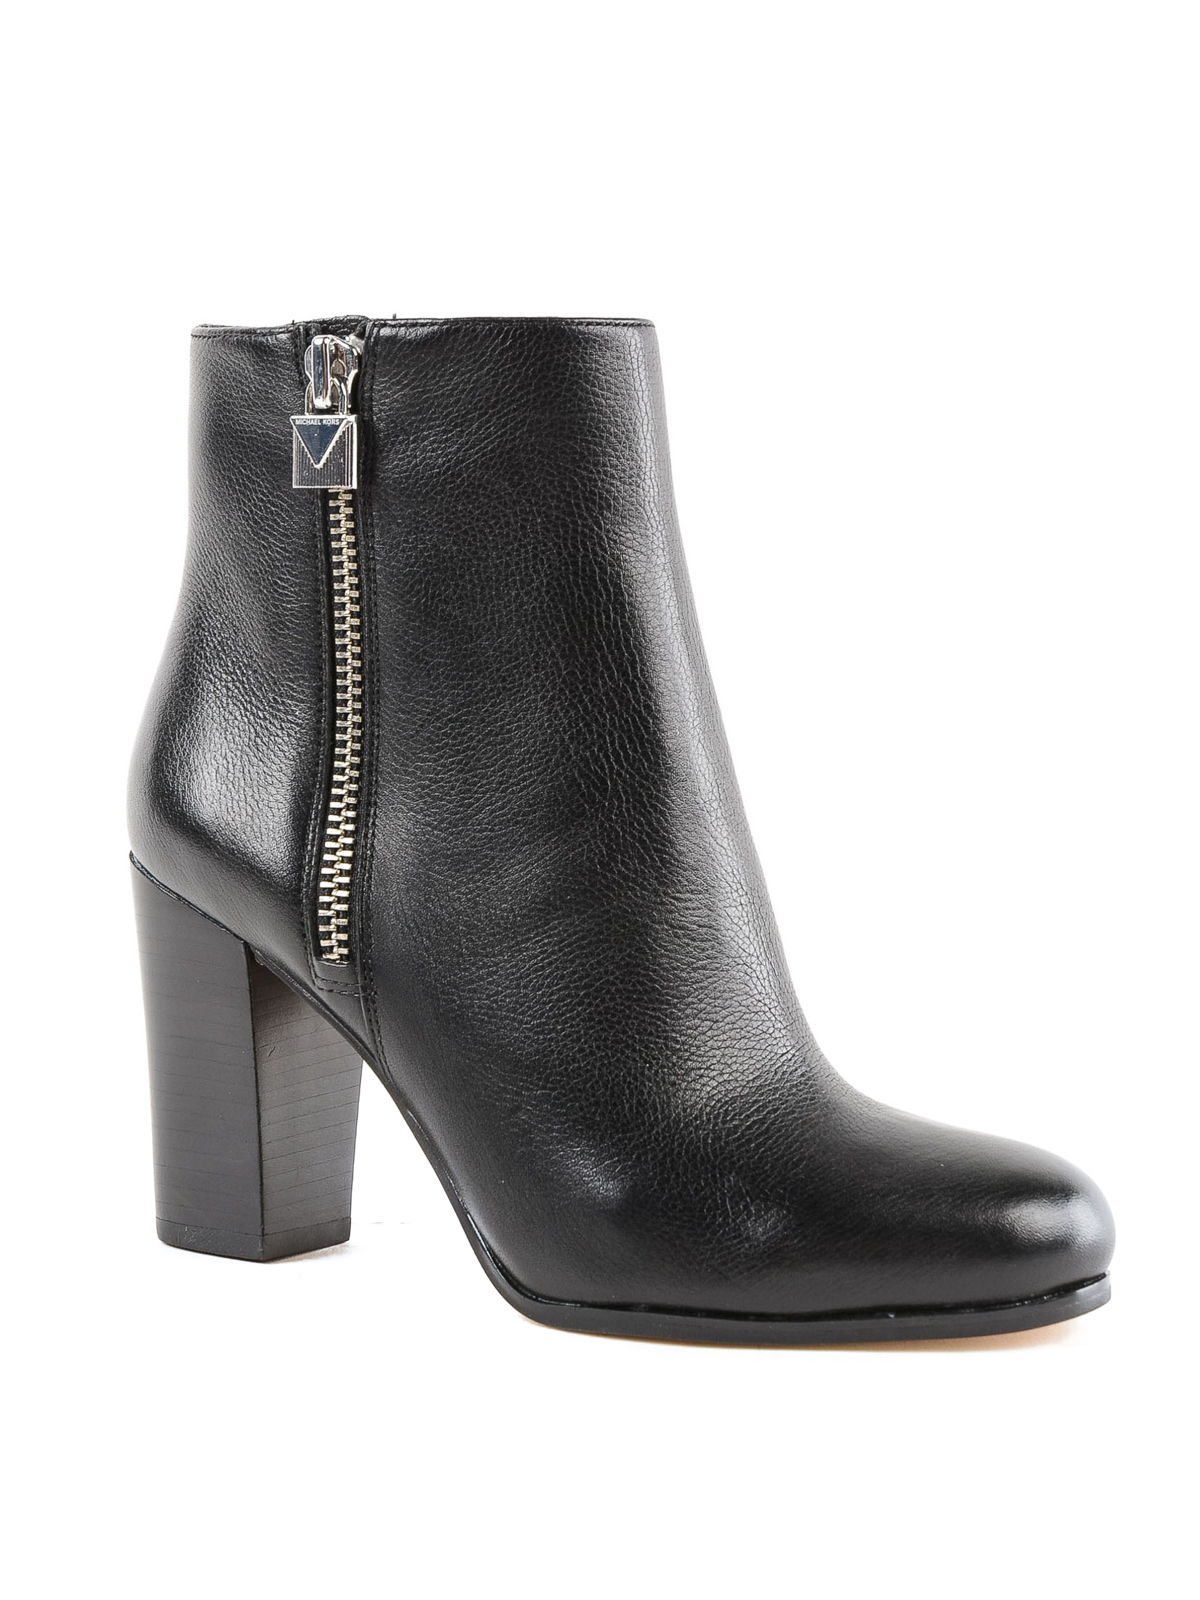 Boots Michael Kors - Margaret calf leather ankle boots - 40F8MGHE5L001